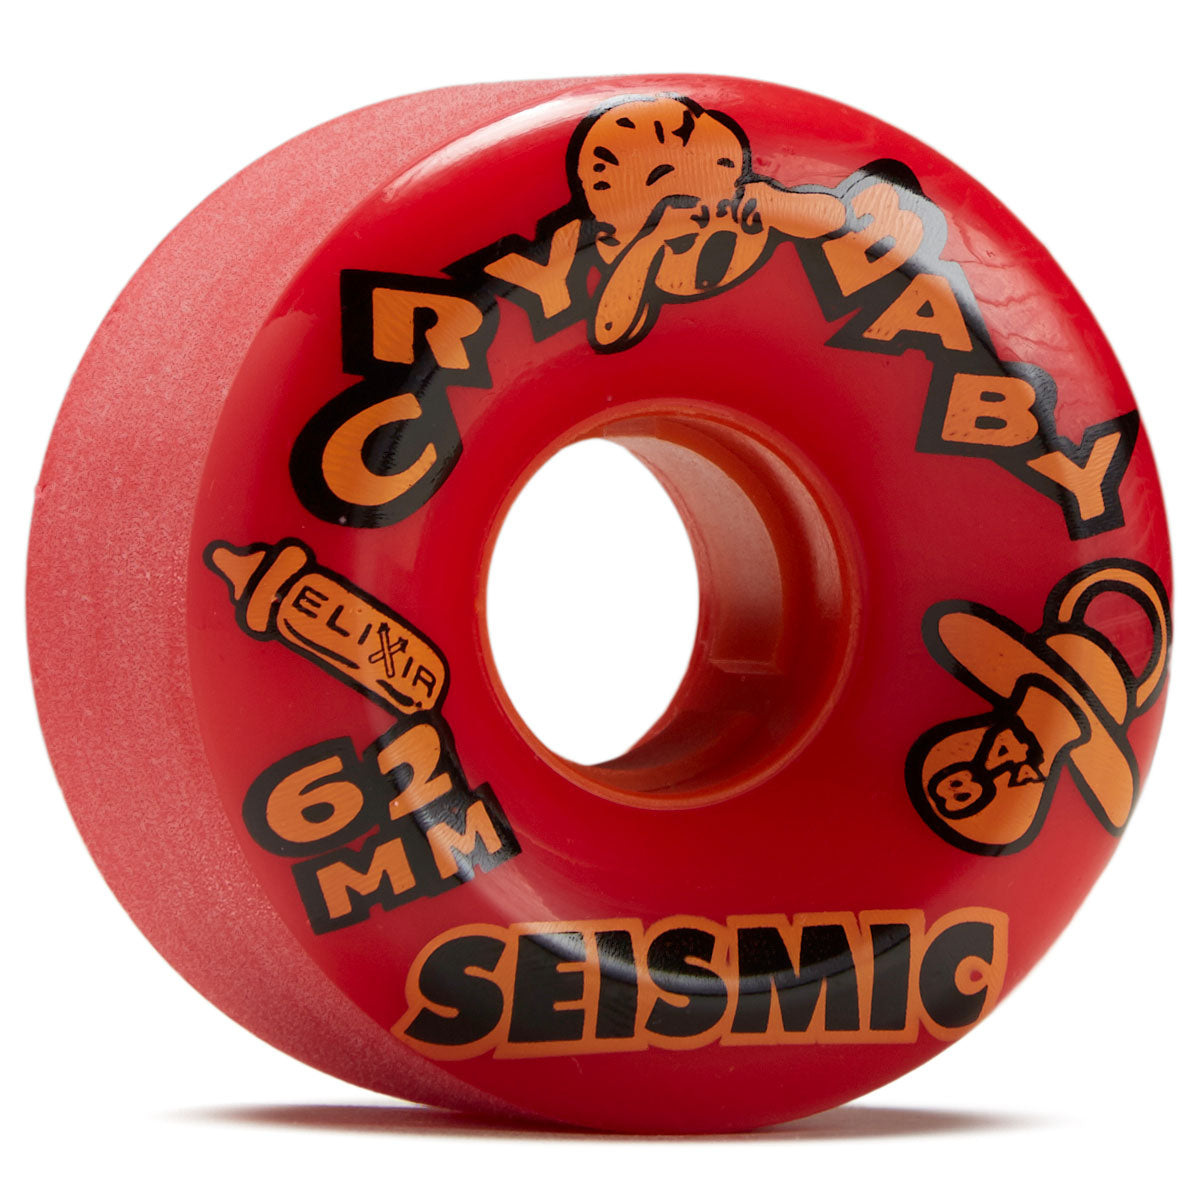 Seismic Crybaby 84a Longboard Wheels - Red Elixir - 62mm image 1